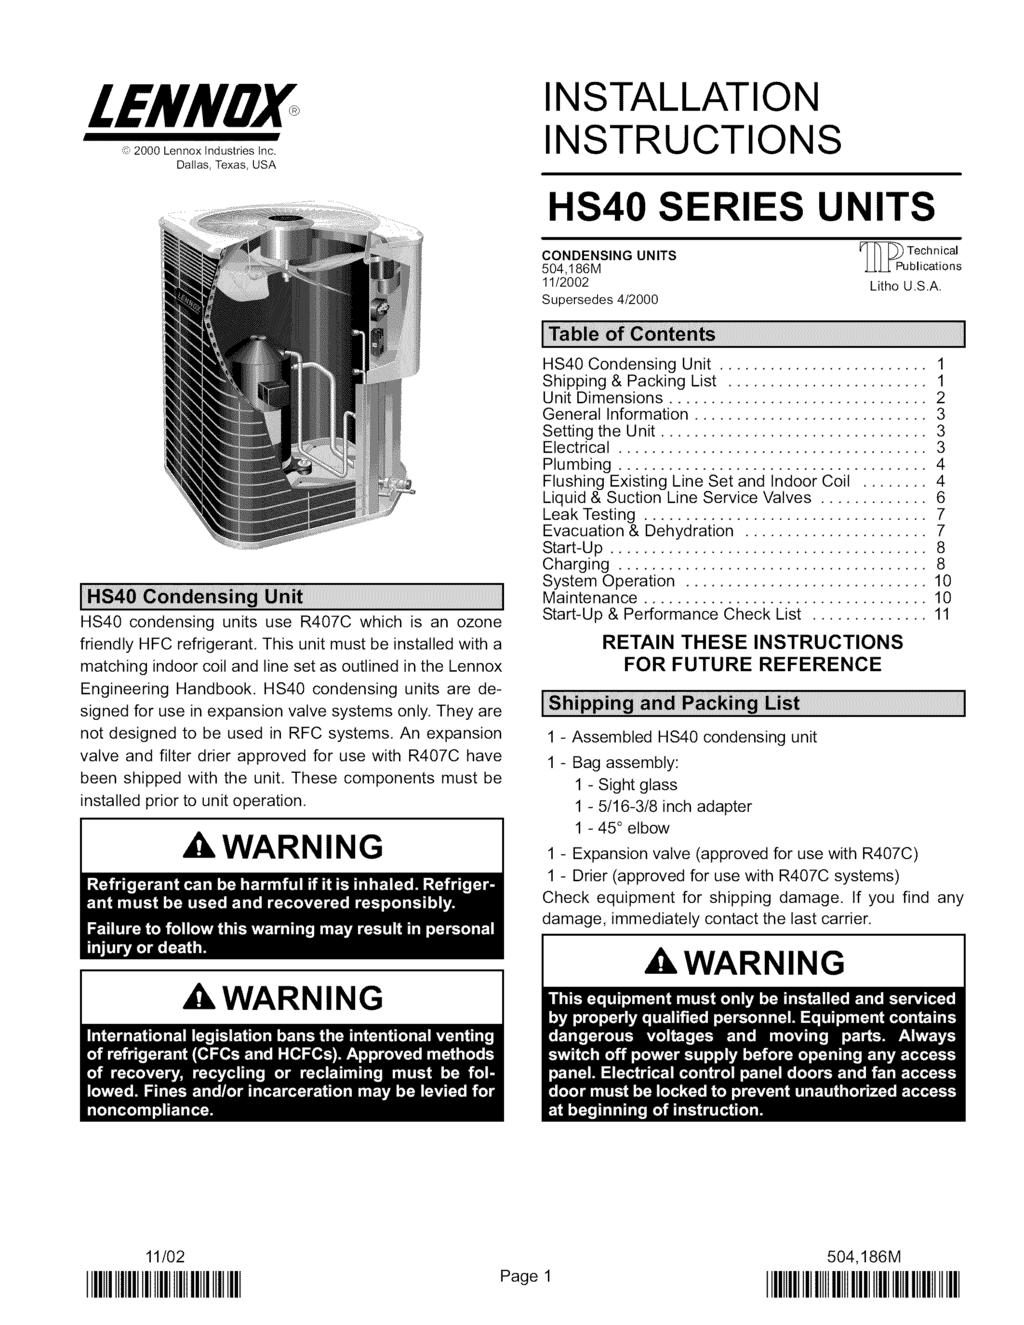 LENNDX,1,_2000 Lennox Industries Inc. Dallas, Texas, USA INSTALLATION INSTRUCTIONS HS40 S UNITS CONDENSING UNITS lie_ :.) Technical 504,186M.LU_ Publications 11/2002 Lithe U.S.A. Supersedes 4/2000 HS40 condensing units use R407C which is an ozone friendly HFC refrigerant.